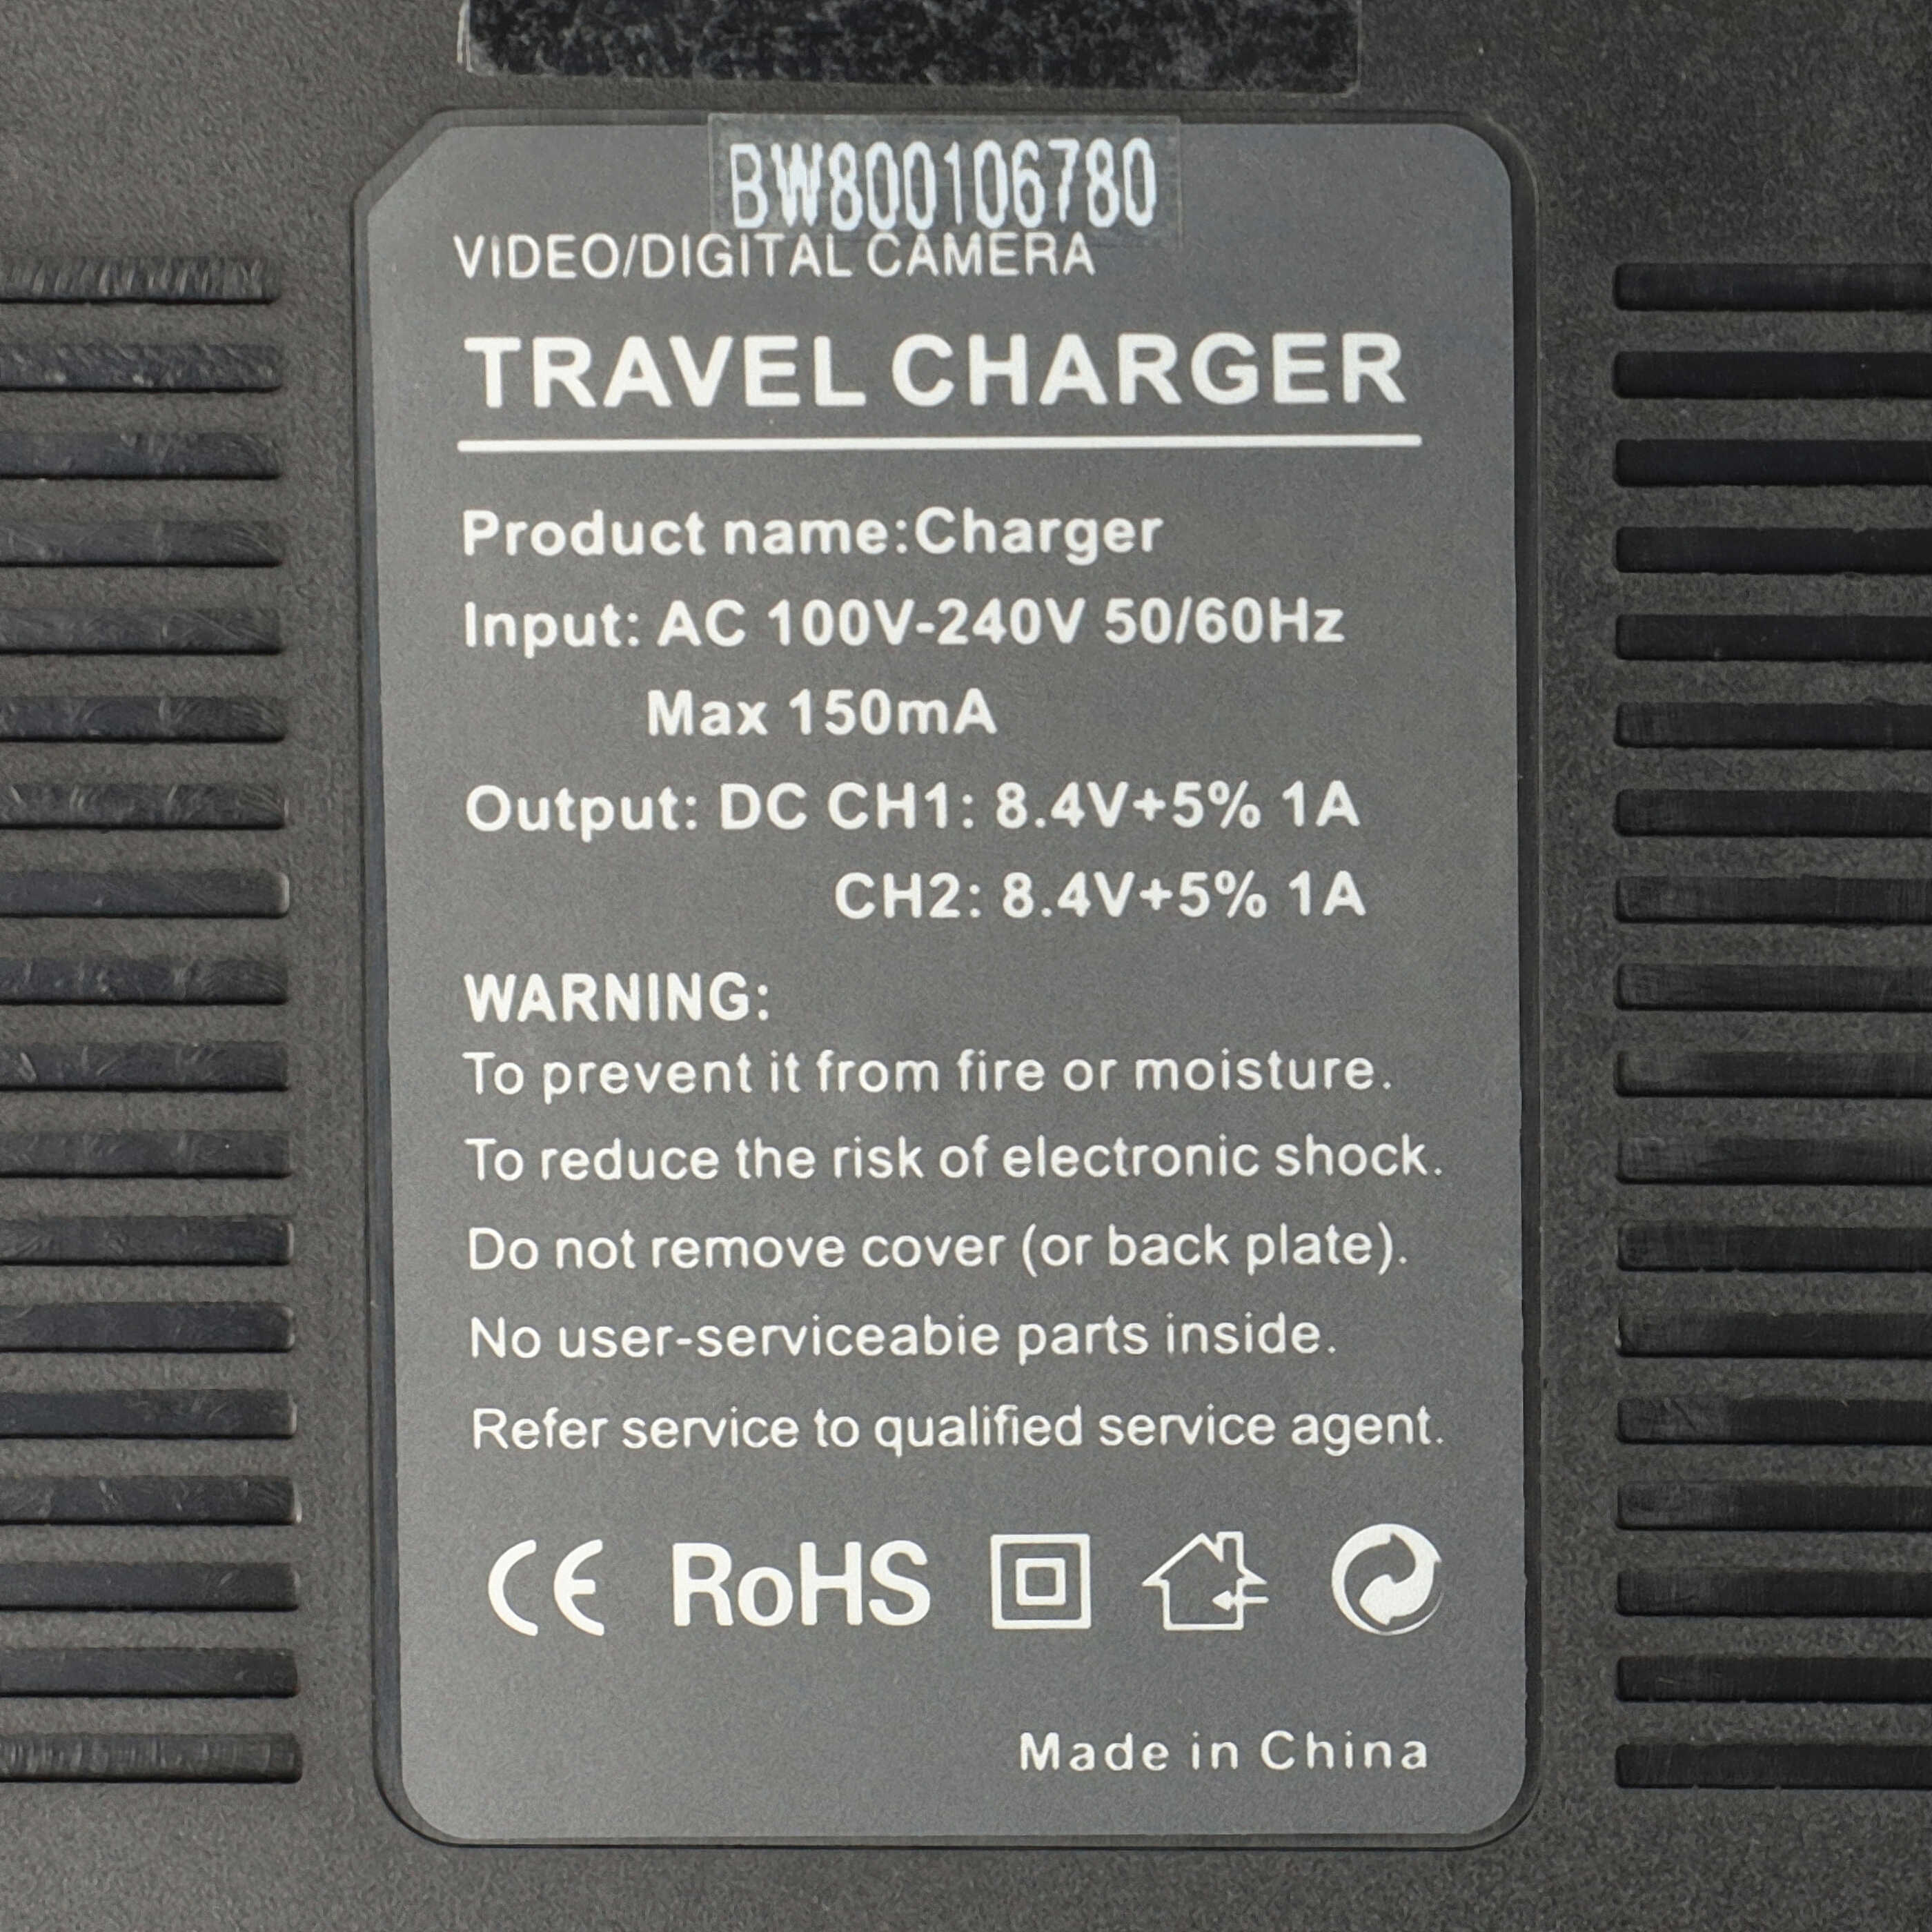 Battery Charger suitable for FinePix S5 Pro Camera etc. - 0.5 / 0.9 A, 4.2/8.4 V